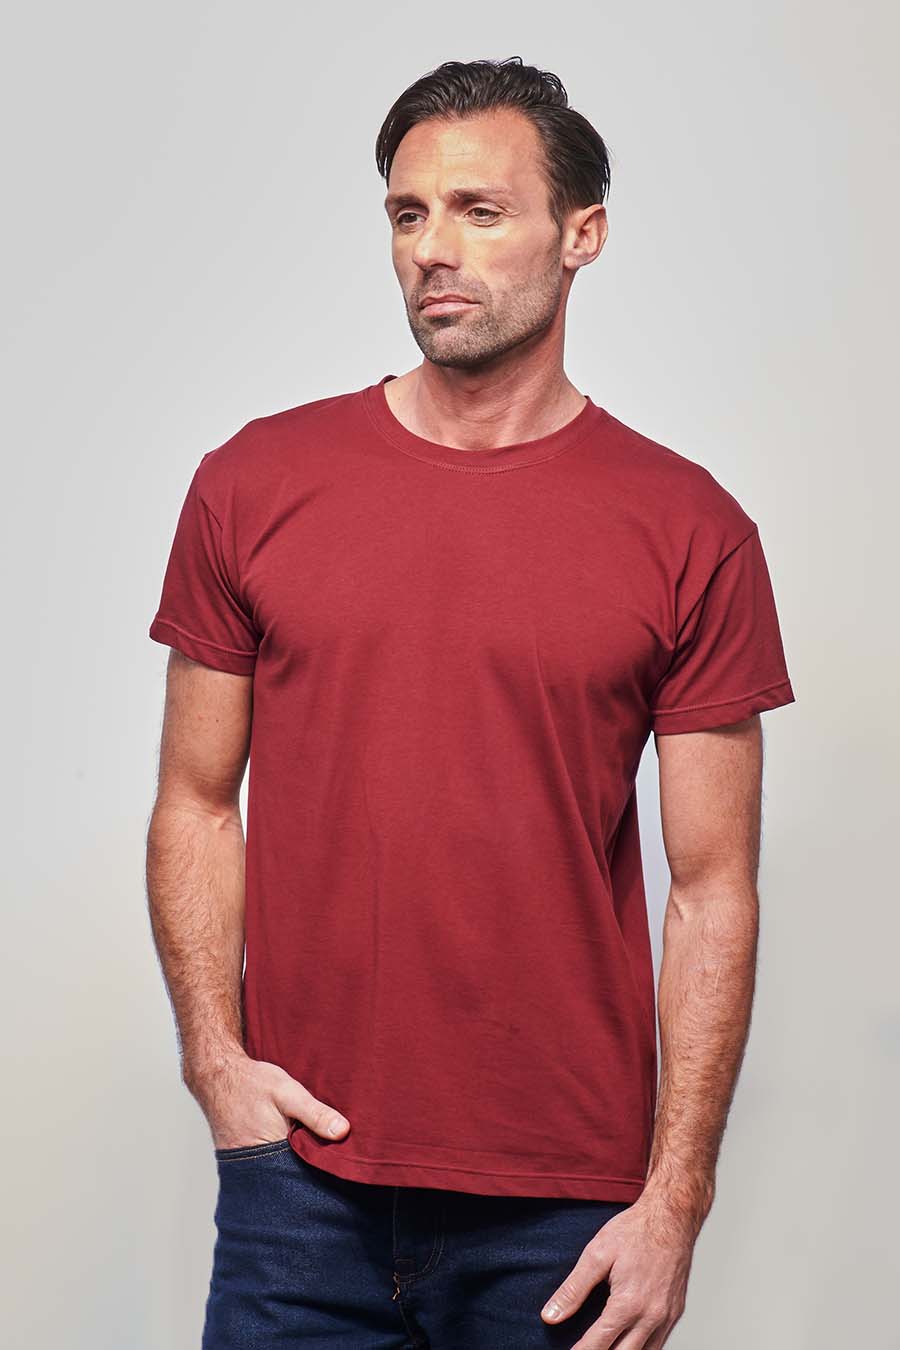 Tee-shirt homme classique made in France bordeaux - FIL ROUGE